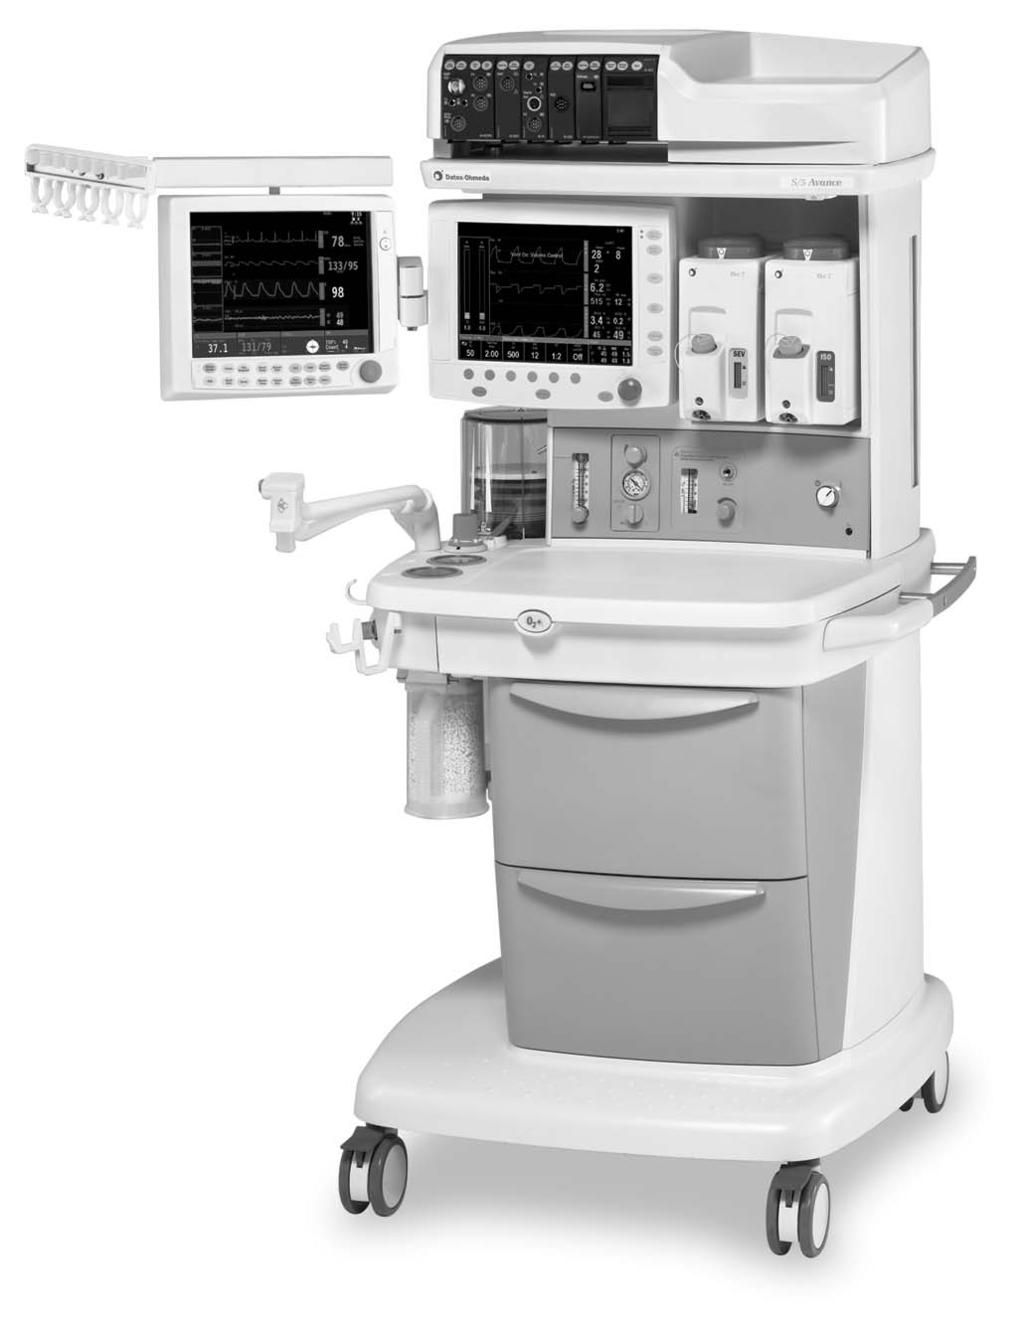 S/5 Avance Innovating with you Shaping exceptional care Shown with S/5 Anesthesia Monitor Features Complete patient monitoring capabilities: respiratory gas, hemodynamic and adequacy of anesthesia